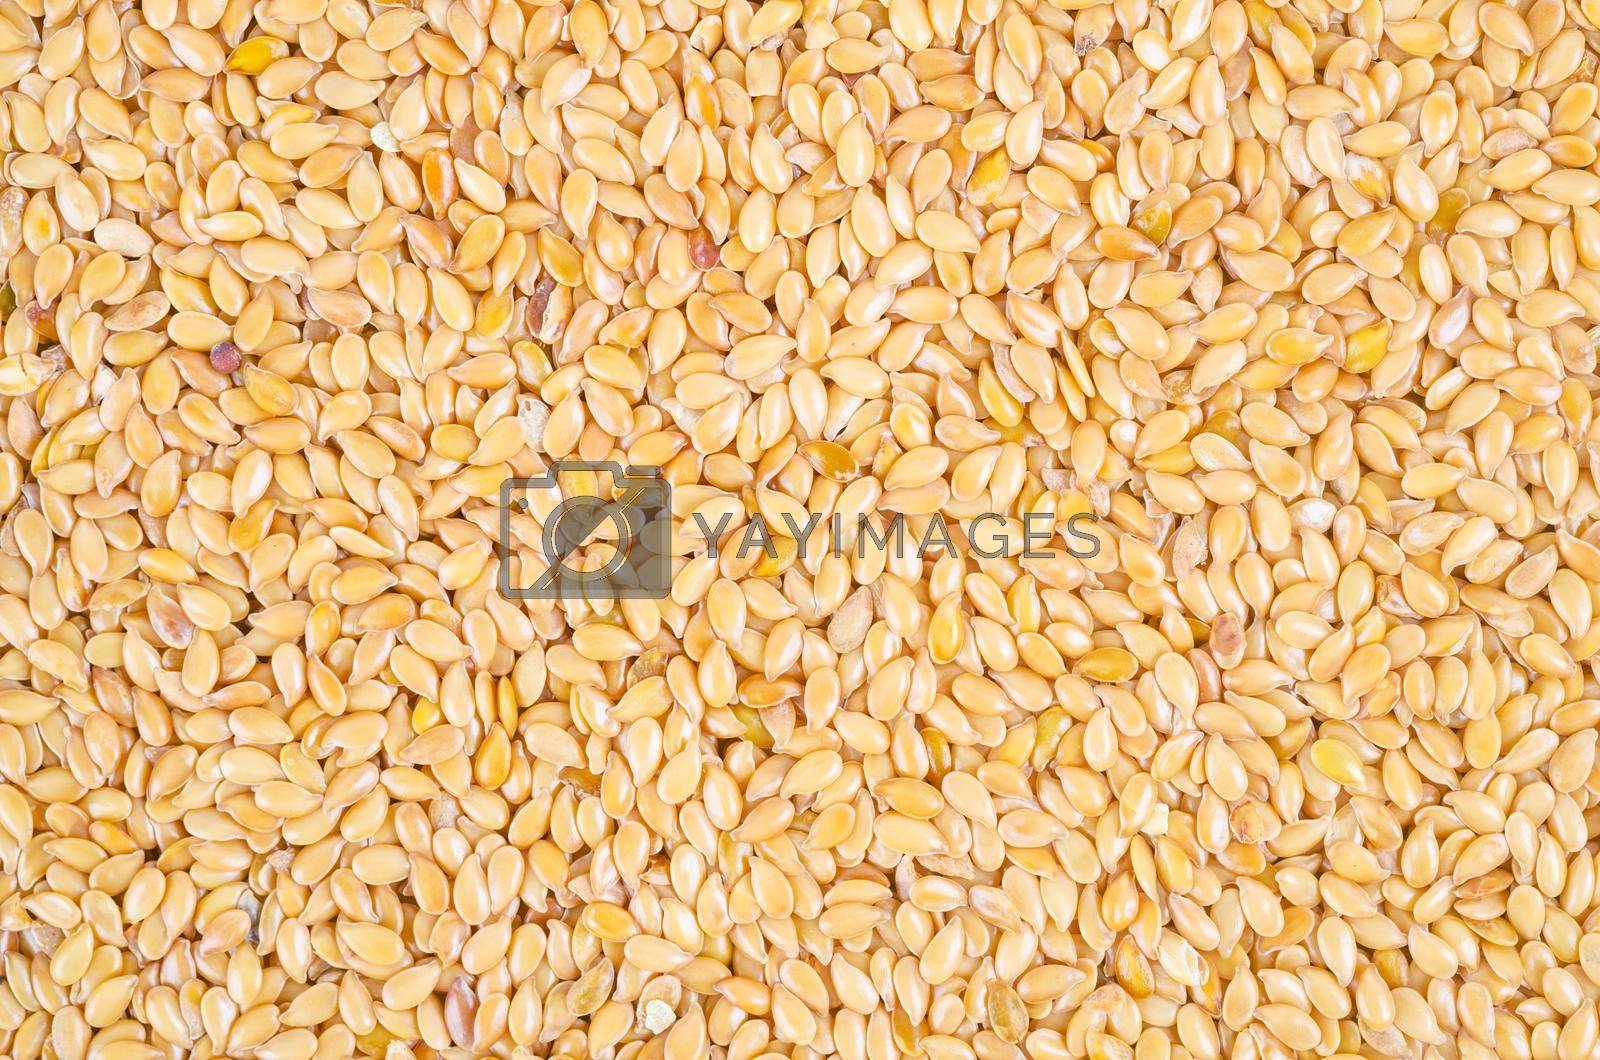 Royalty free image of Gold flax seeds texture as background. by Gamjai